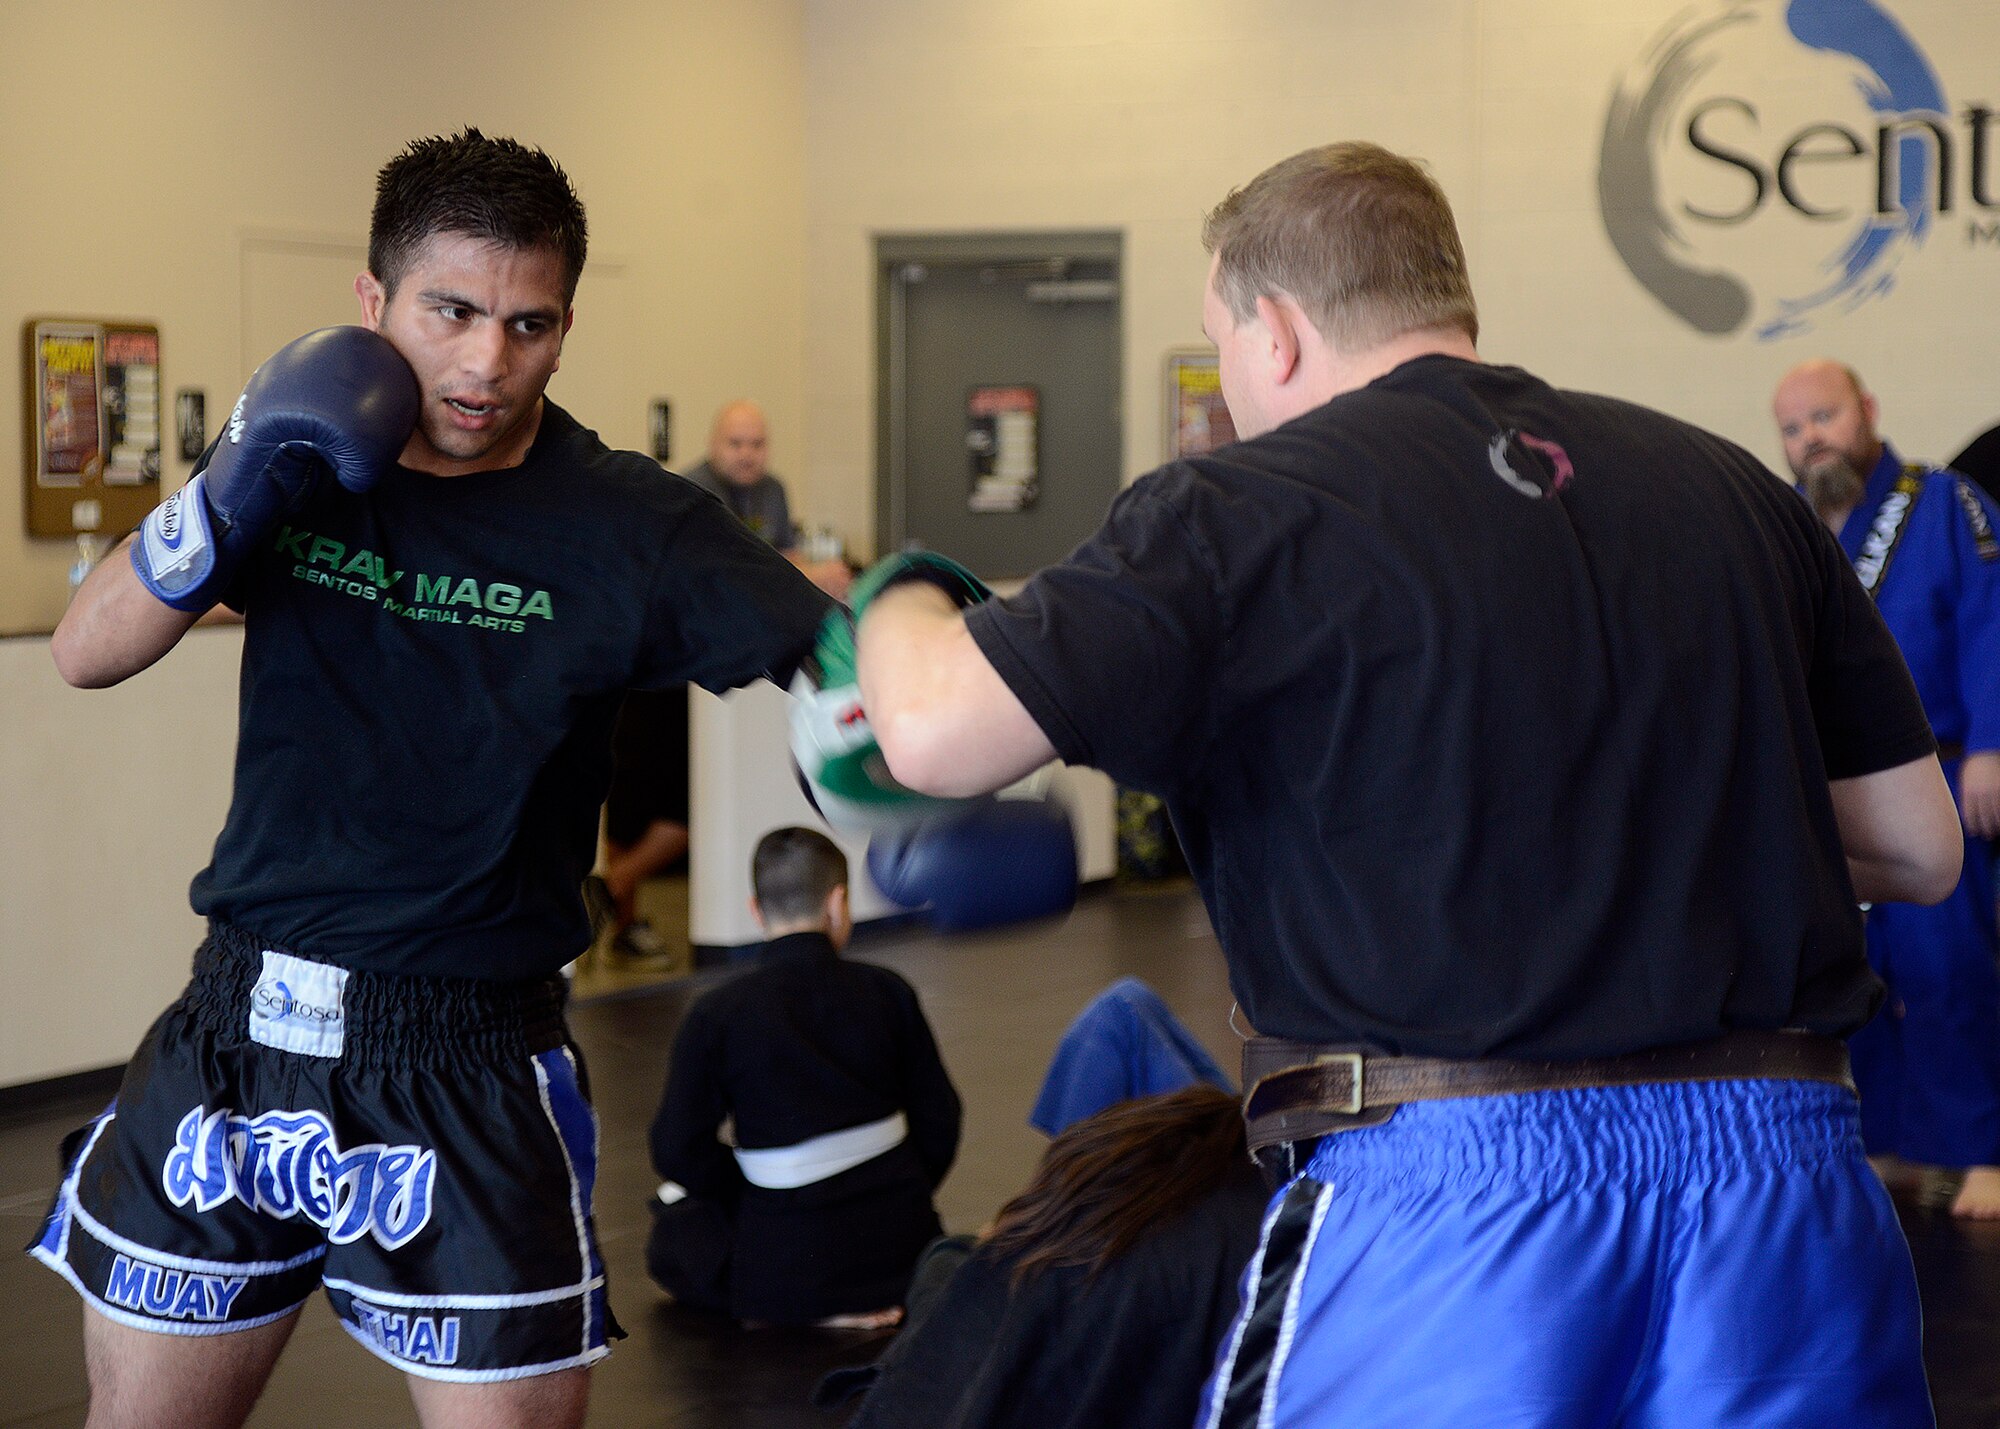 Senior Airman Adrian Cook, 56th Security Forces Squadron patrolman, spars with an instructor during his black belt ceremony at Sentosa Martial Arts in Avondale, Ariz., March 12, 2016. In order to receive the black belt, Cook had to go through rigorous training which included boxing, sparring, and ground game (U.S. Air Force photo by Senior Airman Devante Williams)